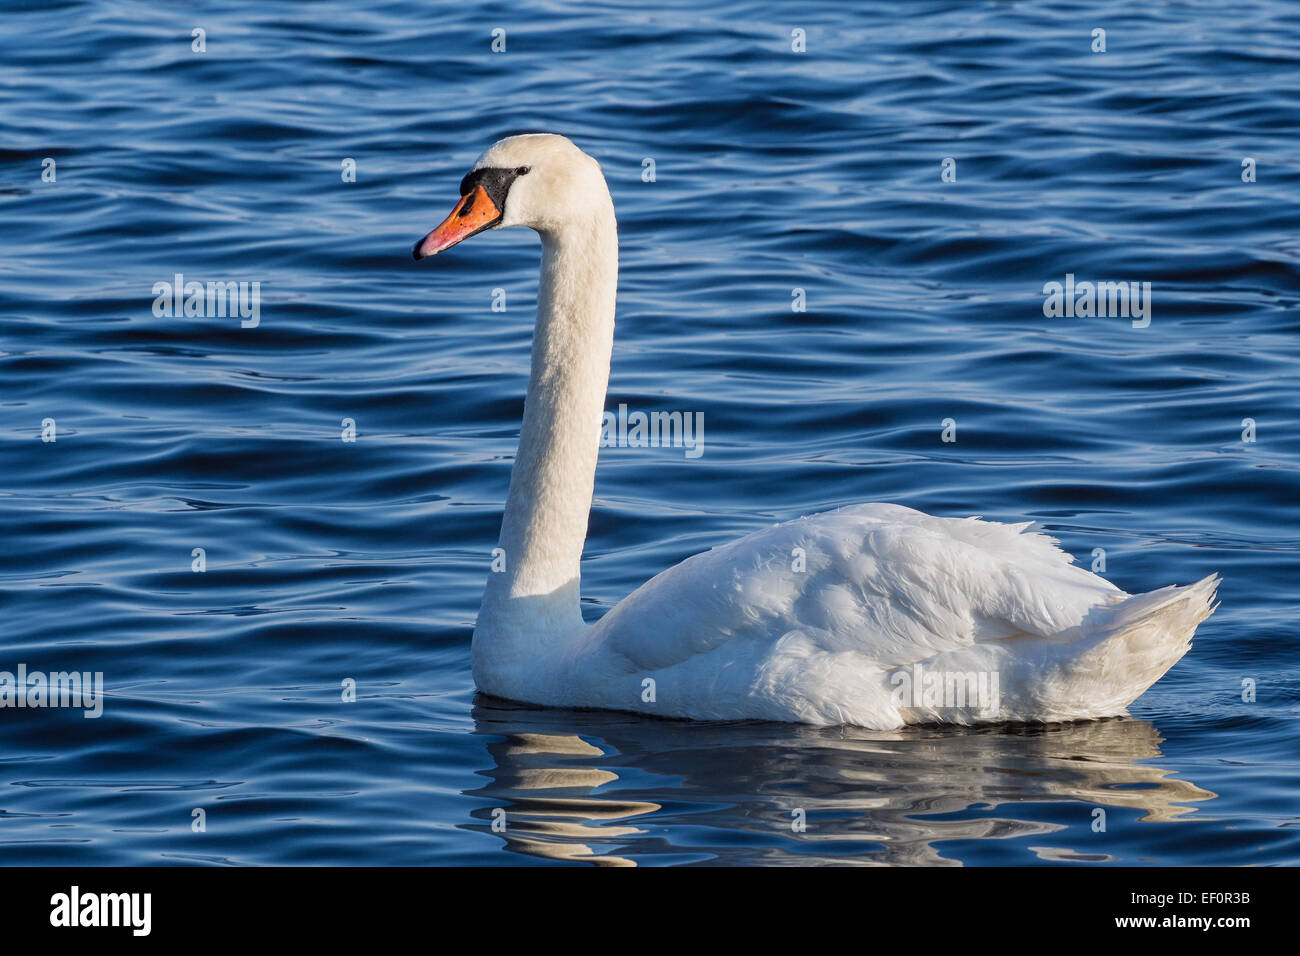 A swan swimming in the water. Stock Photo